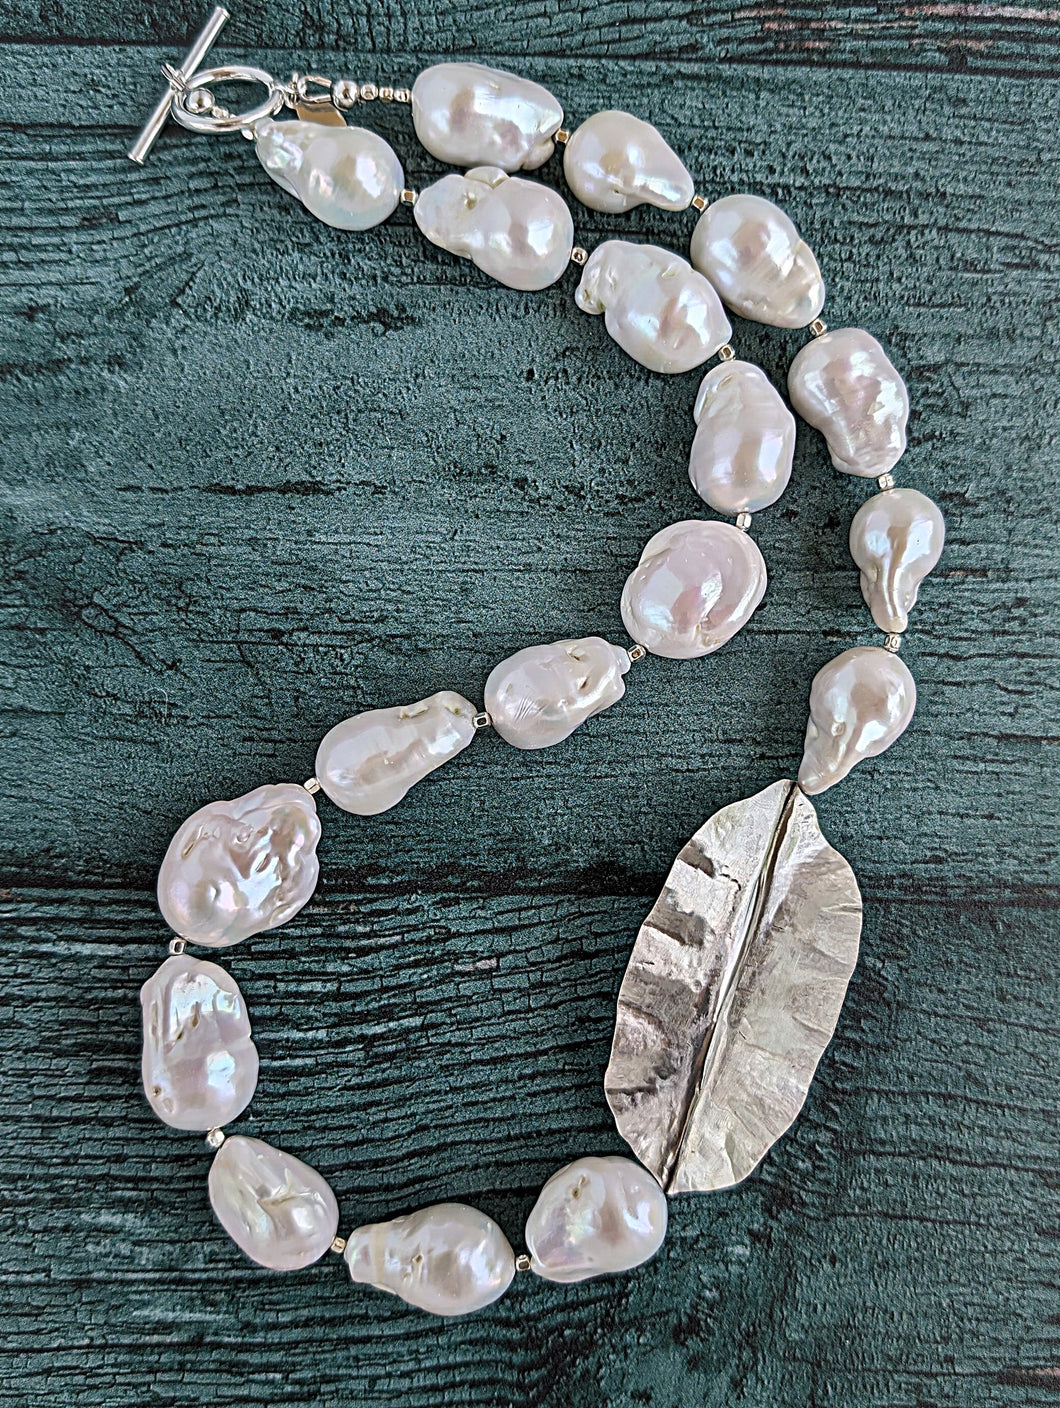 White Baroque pearl and silver necklace with hammered and fold form leaf design in silver with small silver beads in between each pearl. Necklace is finished with silver toggle clasp and designer tag.